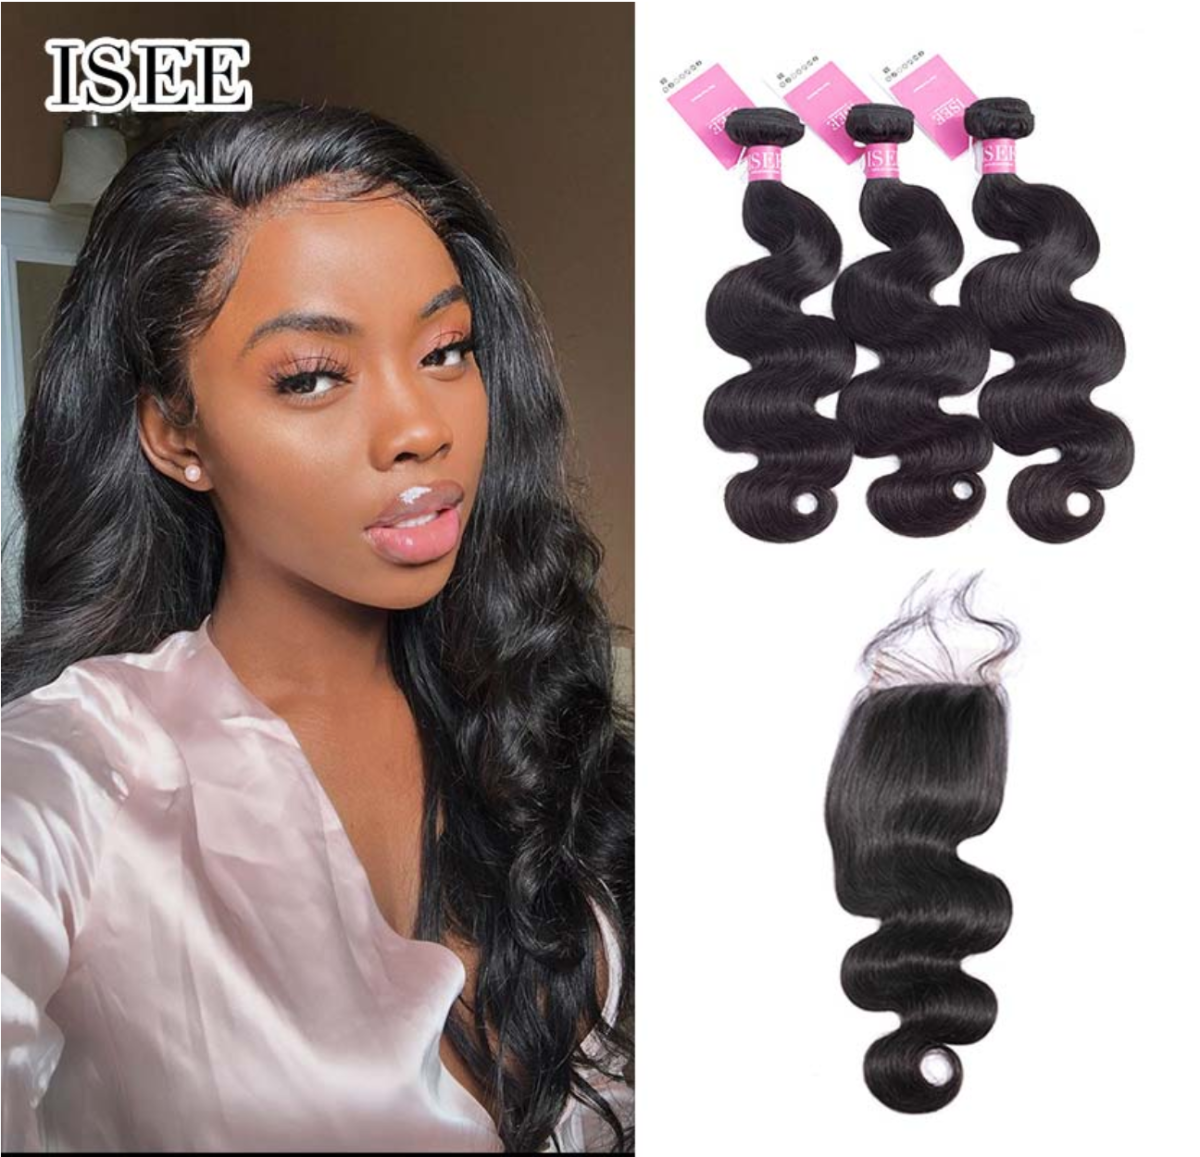 Isee Hair: Reveal The Beauty Of Your Hair Bundles & Enhance Your Style